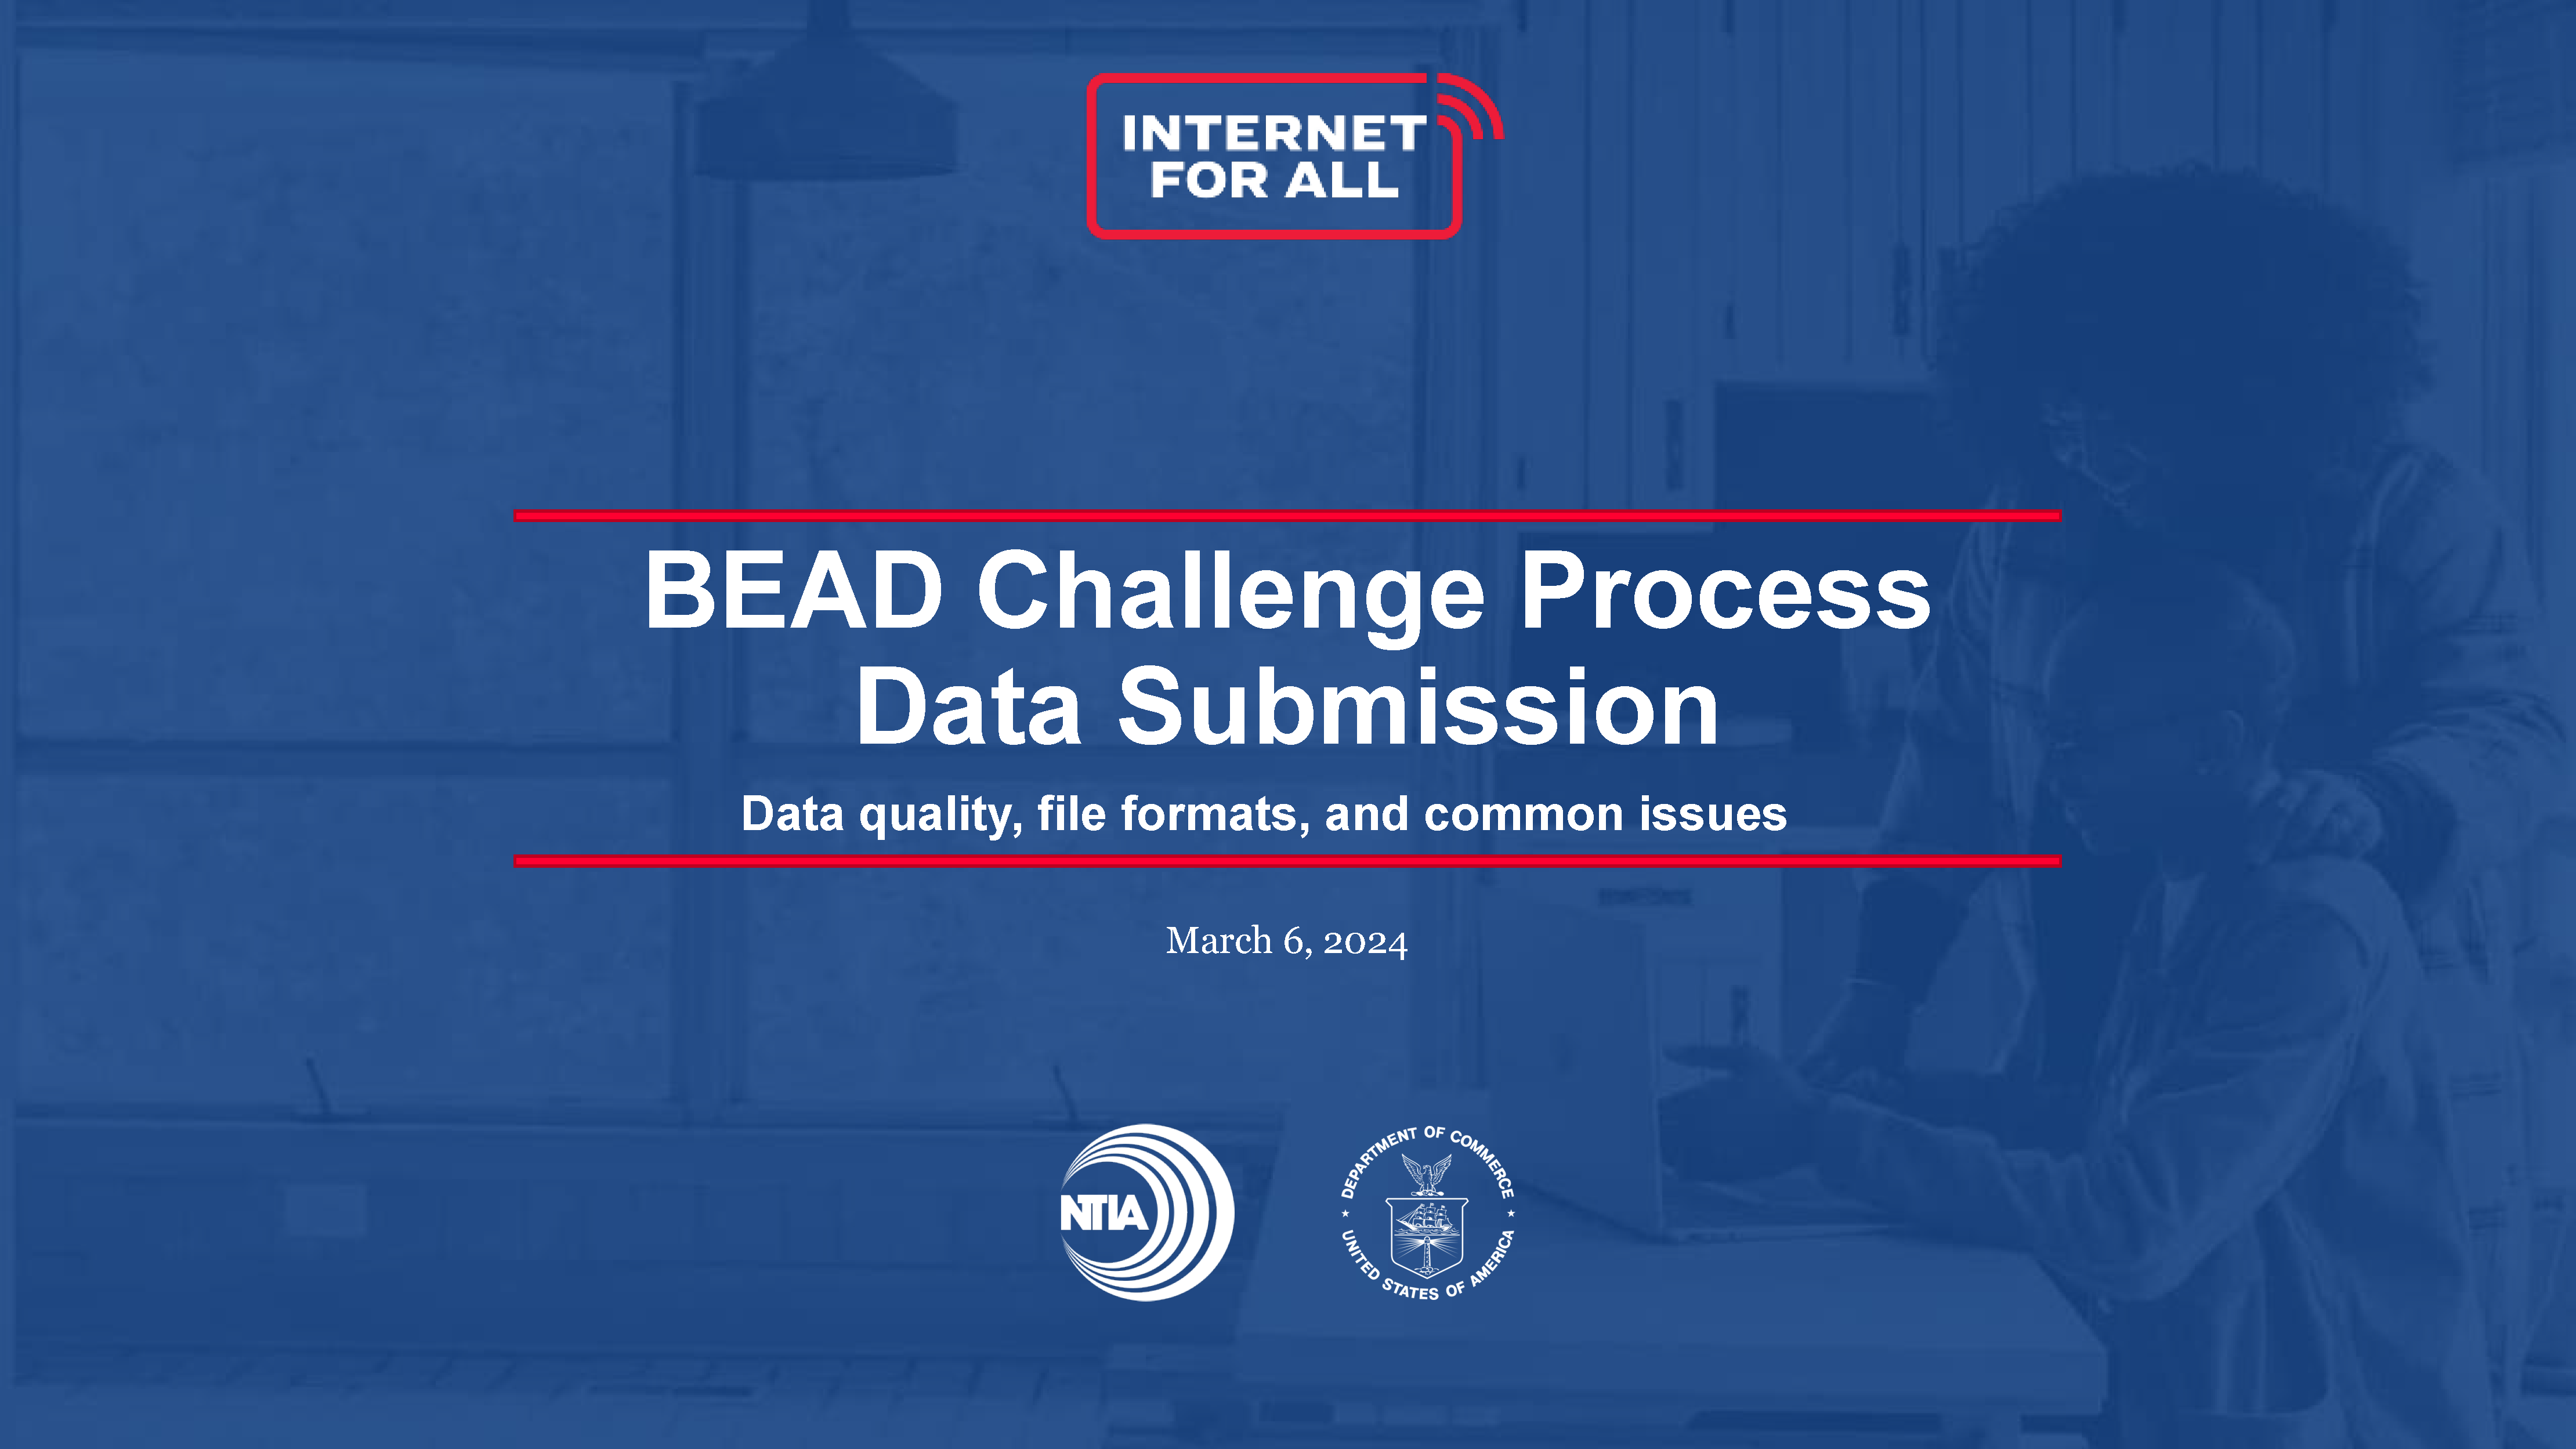 BEAD Challenge Process Data Submission - Data Quality, File Formats, and Common Issues